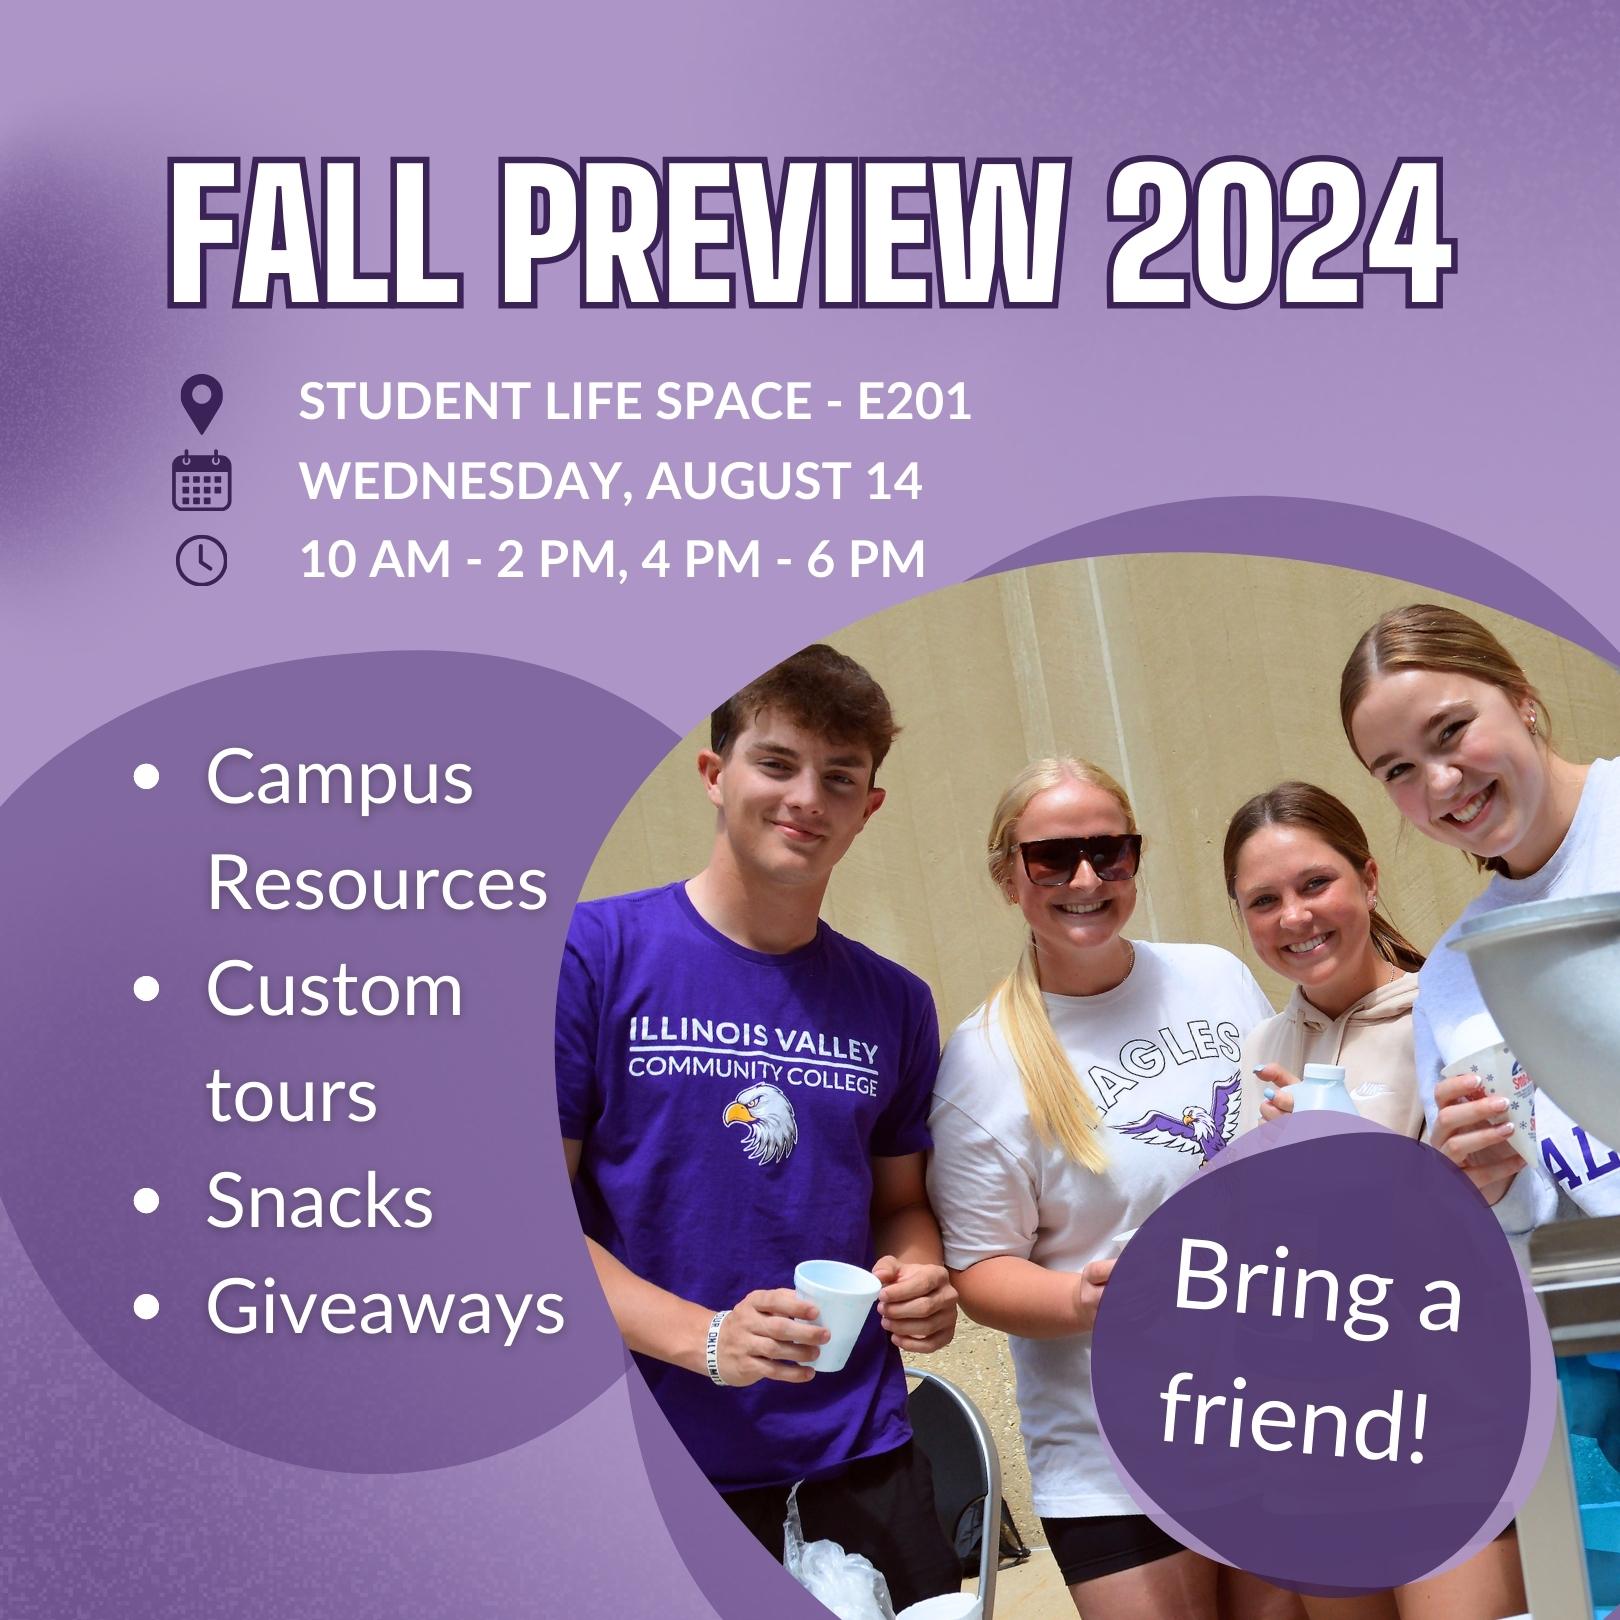 Attend Fall Preview on August 14th near the Student Life Space between 10-2 & 4-6 for resources & custom tours.